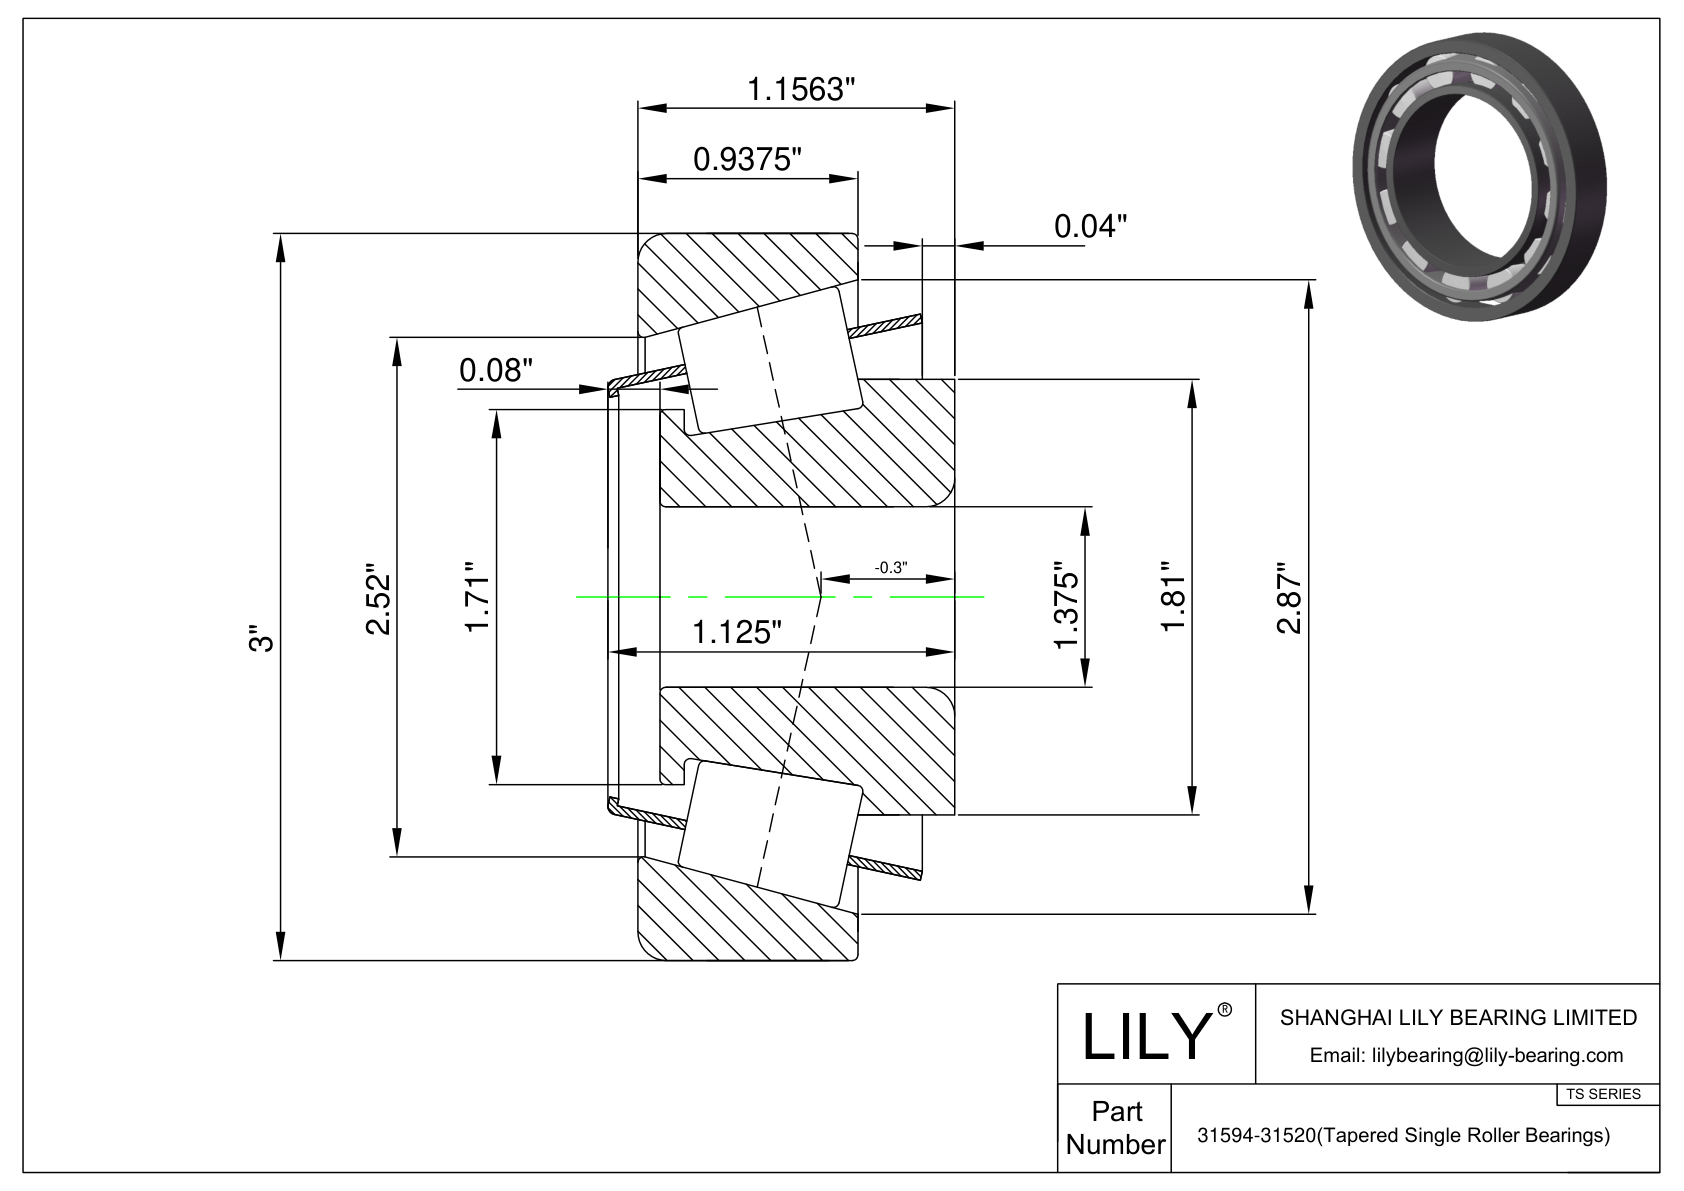 31594-31520 TS (Tapered Single Roller Bearings) (Imperial) cad drawing